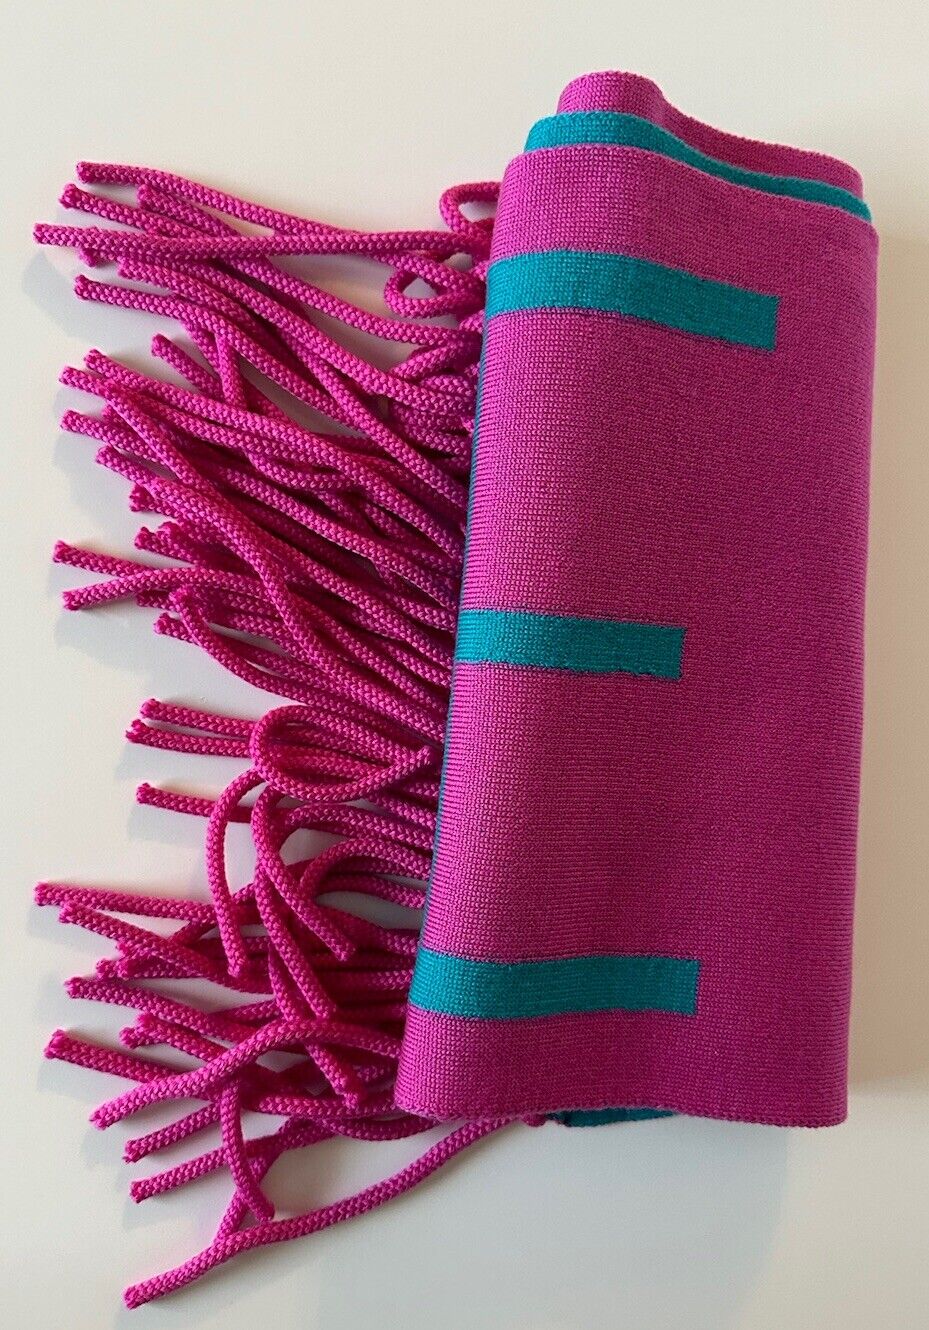 Versace Knit Logo Wool Pink/Turquoise Scarf 12Wx70L Italy 1008851 New $825